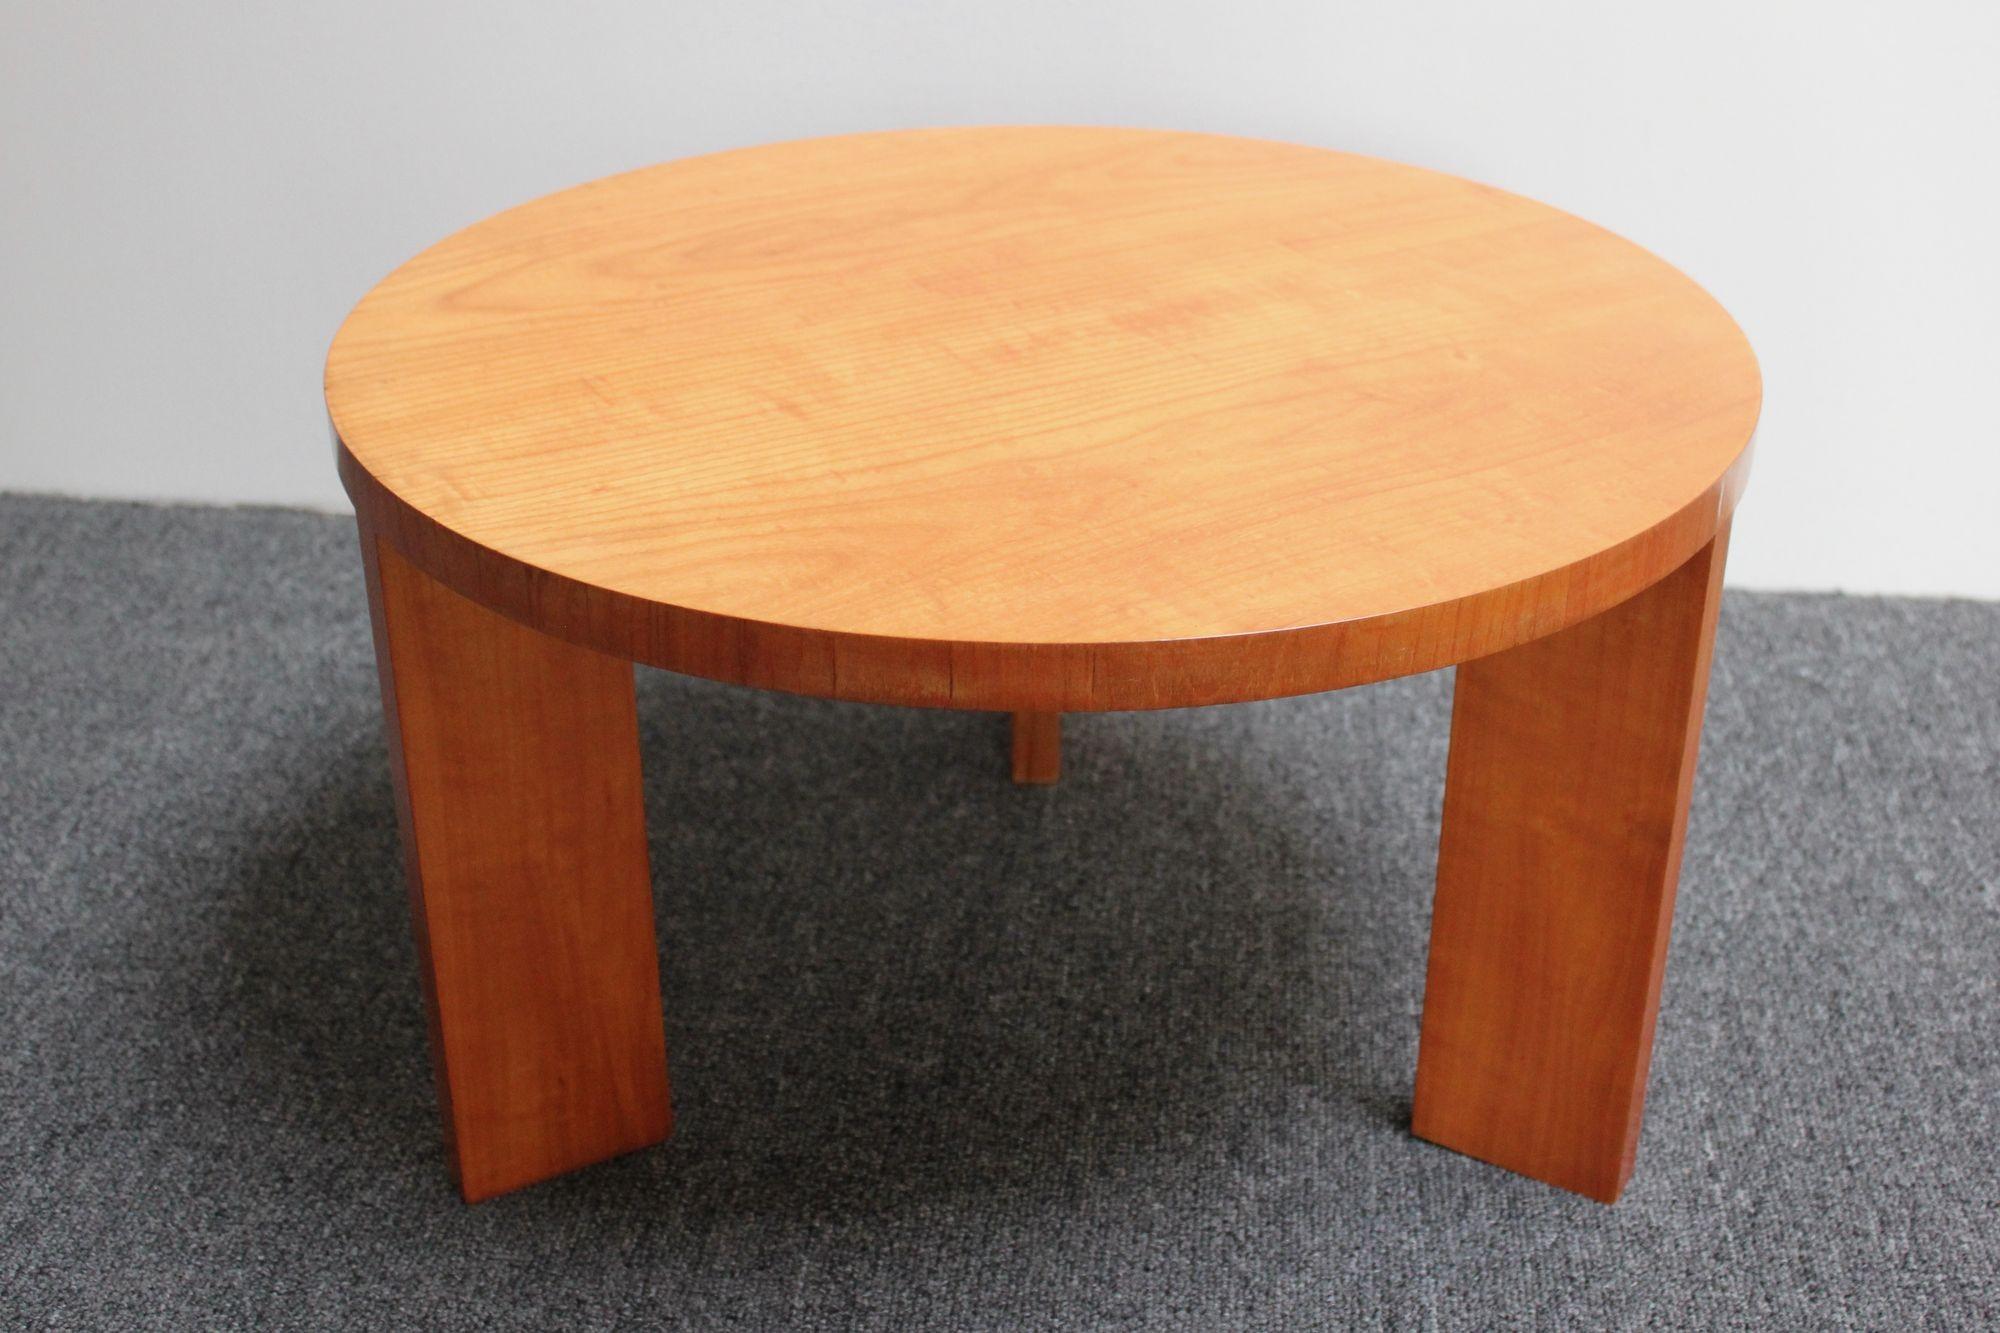 Small, low accent table (table basse) in stained ash with round top supported by three solid rectangular legs designed by Jacques Quinet.
The piece has been polished, not restored, and retains patina/light wear (stain loss to the edge along with a